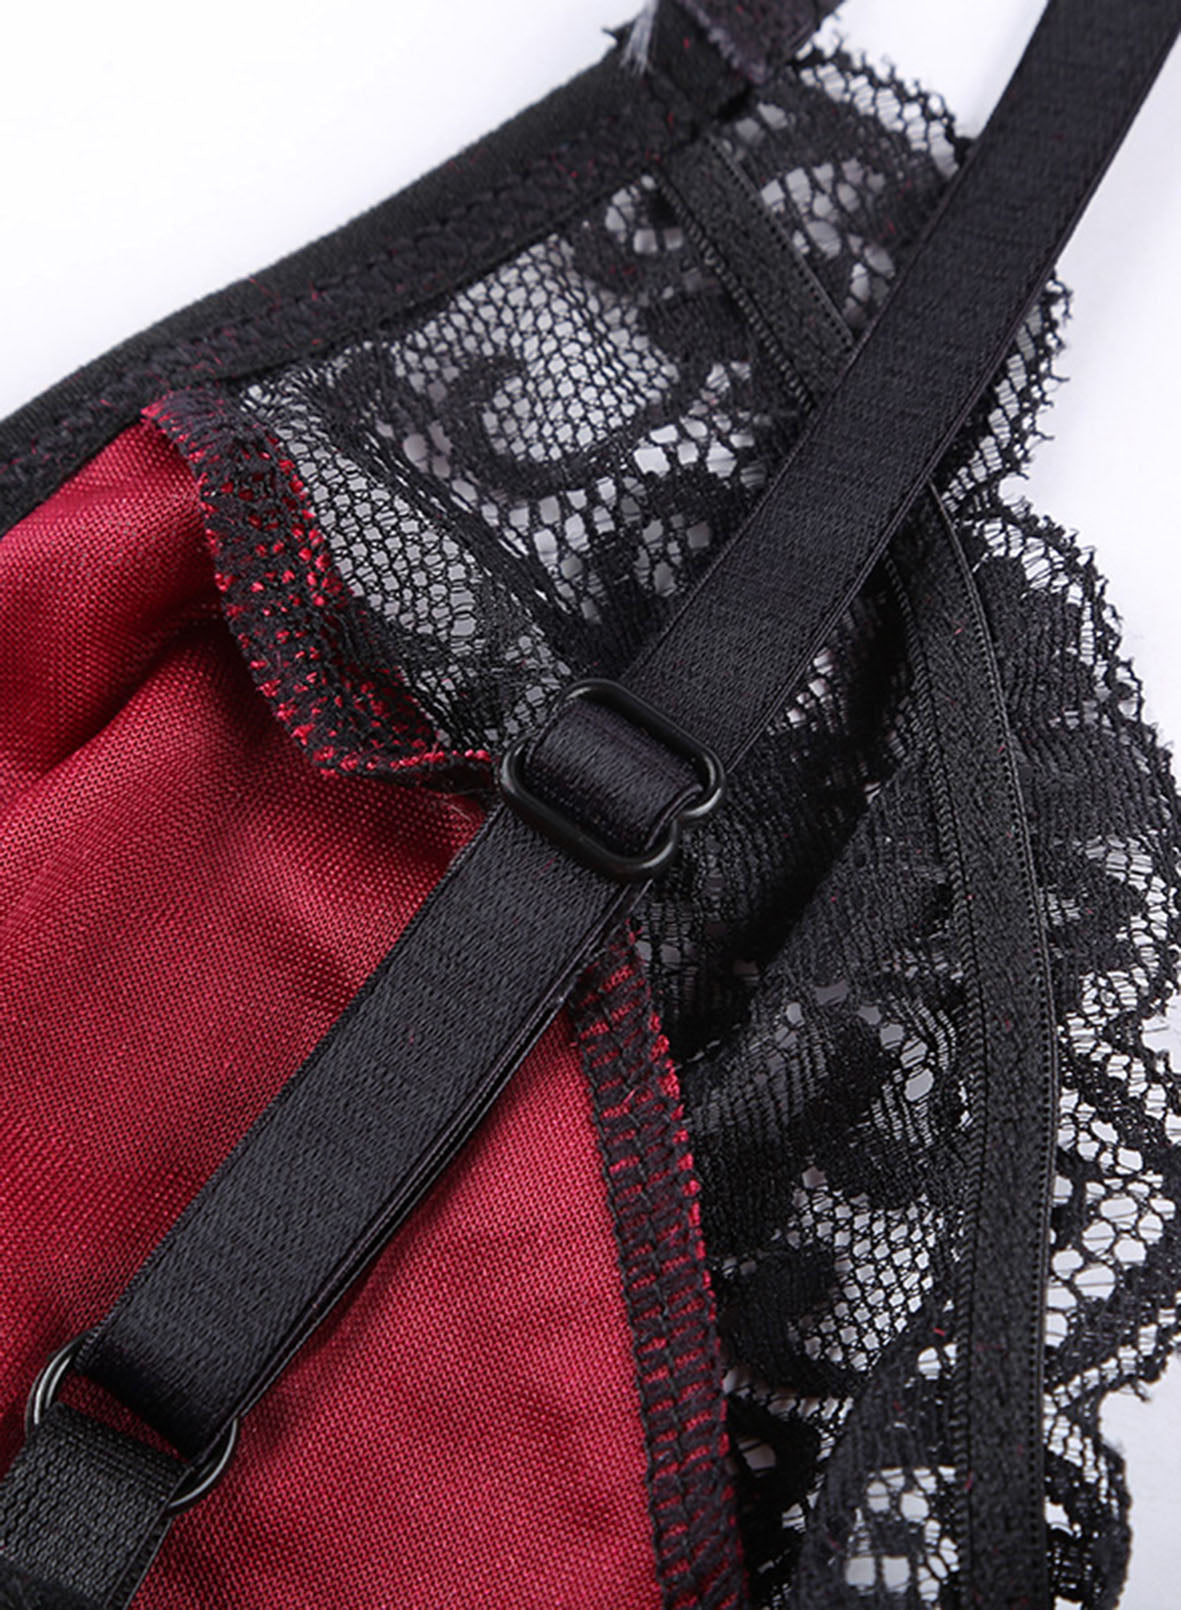 Red Velvet Lace Mesh Stitching Sexy Teddy Lingerie